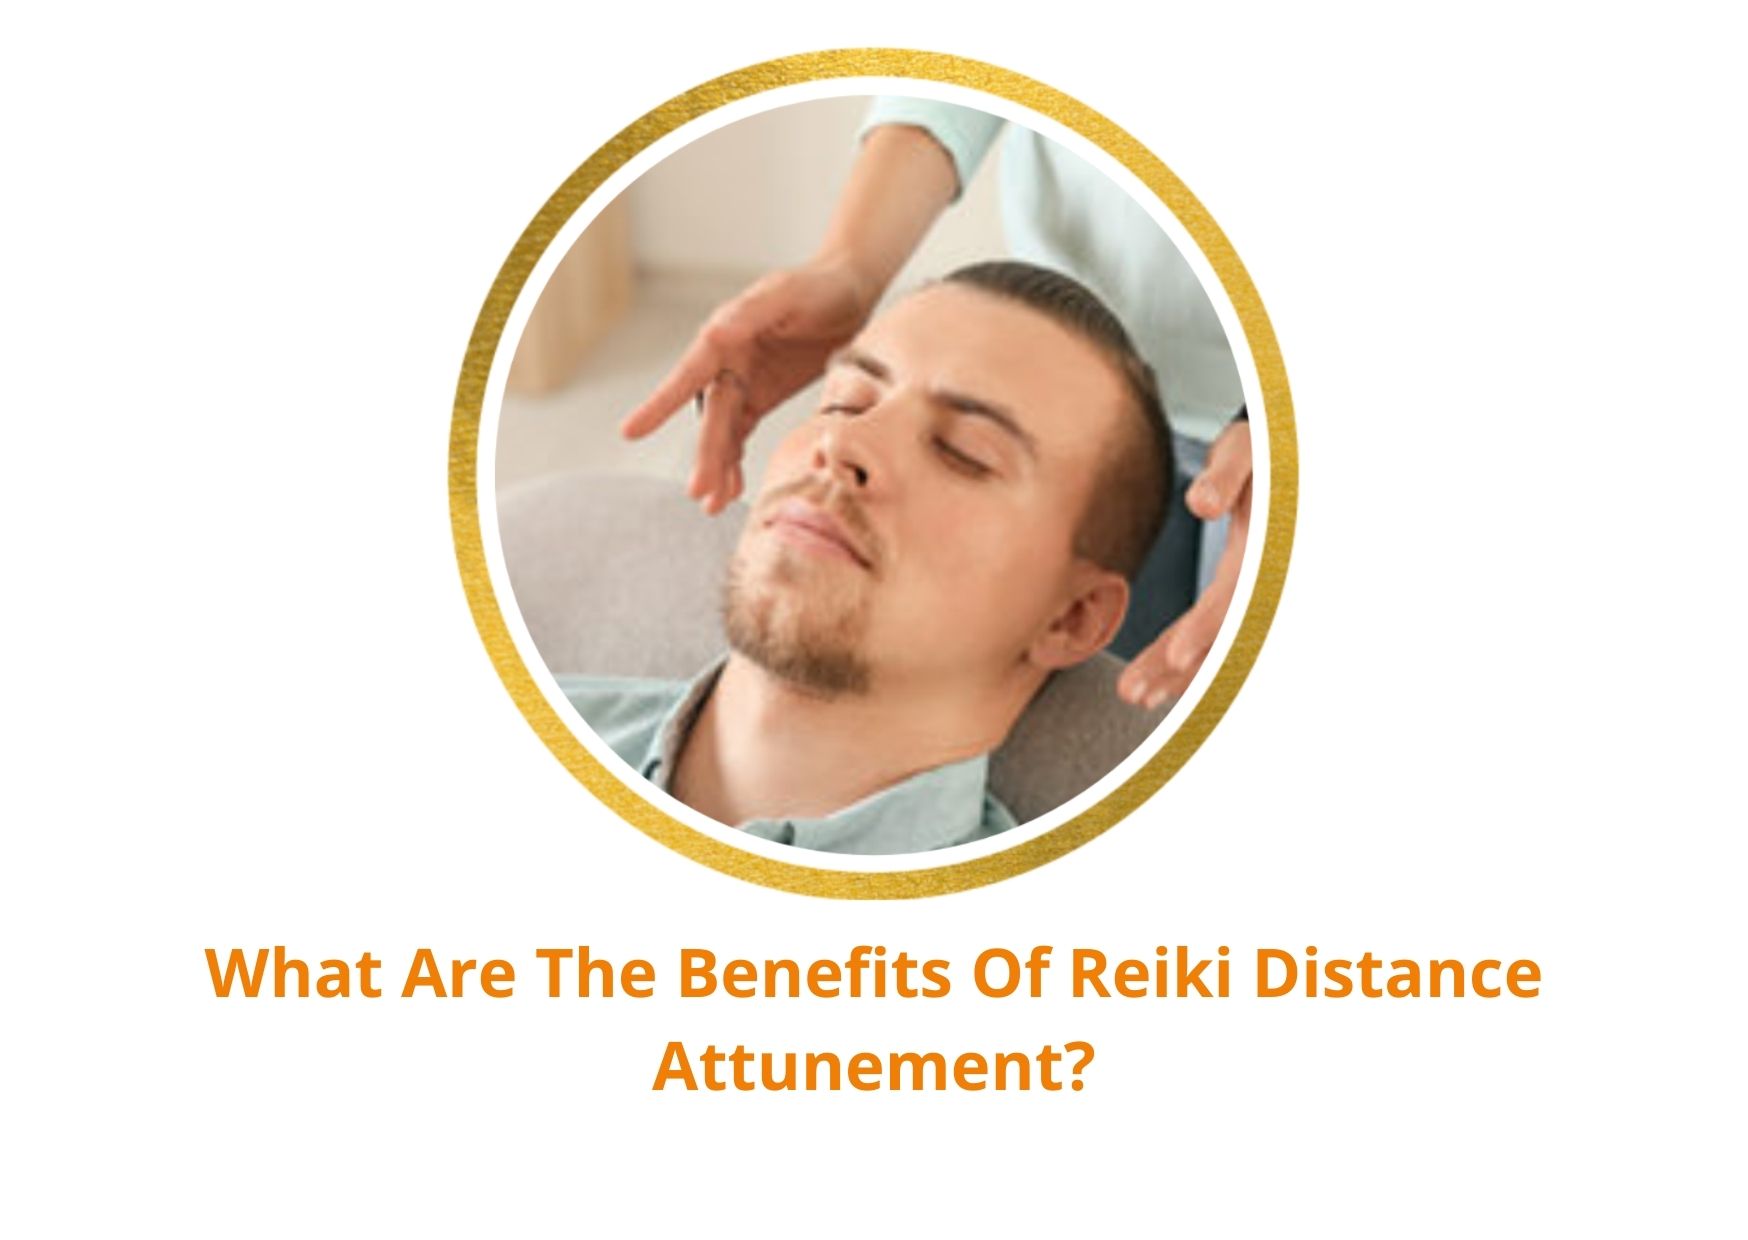 A man leaning back on the couch while receiving a reiki attunement